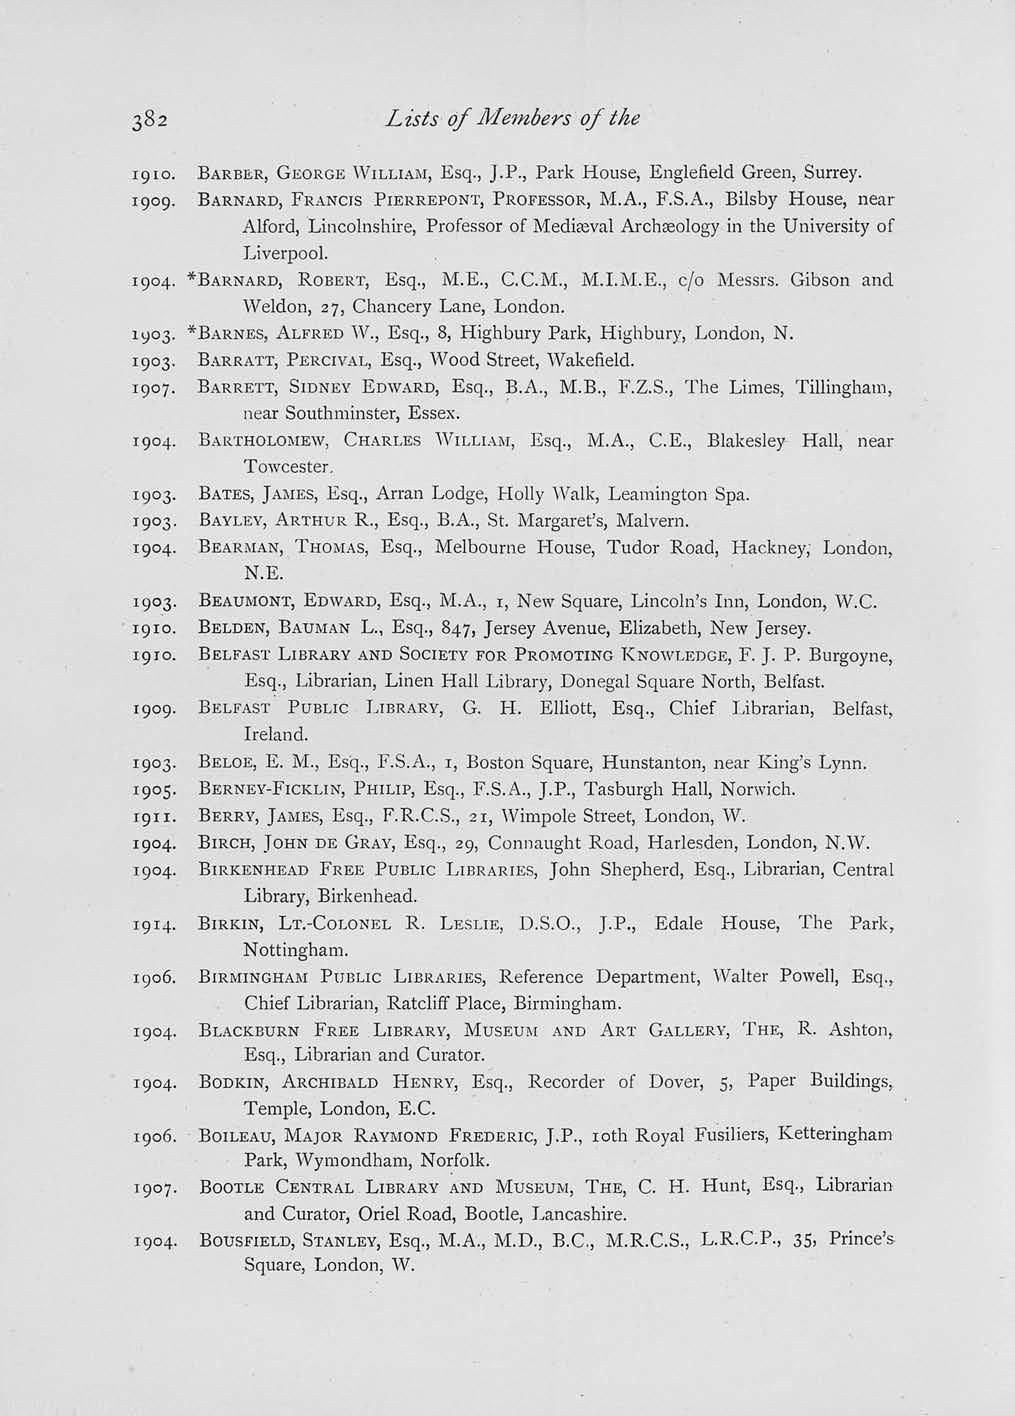 Lists of Members of the 1910. BARBER, GEORGE WILLIAM, Esq., J.P., Park House, Englefield Green, Surrey. 1909. BARNARD, FRANCIS PIERREPONT, PROFESSOR, M.A., F.S.A., Bilsby House, near Alford, Lincolnshire, Professor of Mediajval Archseology in the University of Liverpool.